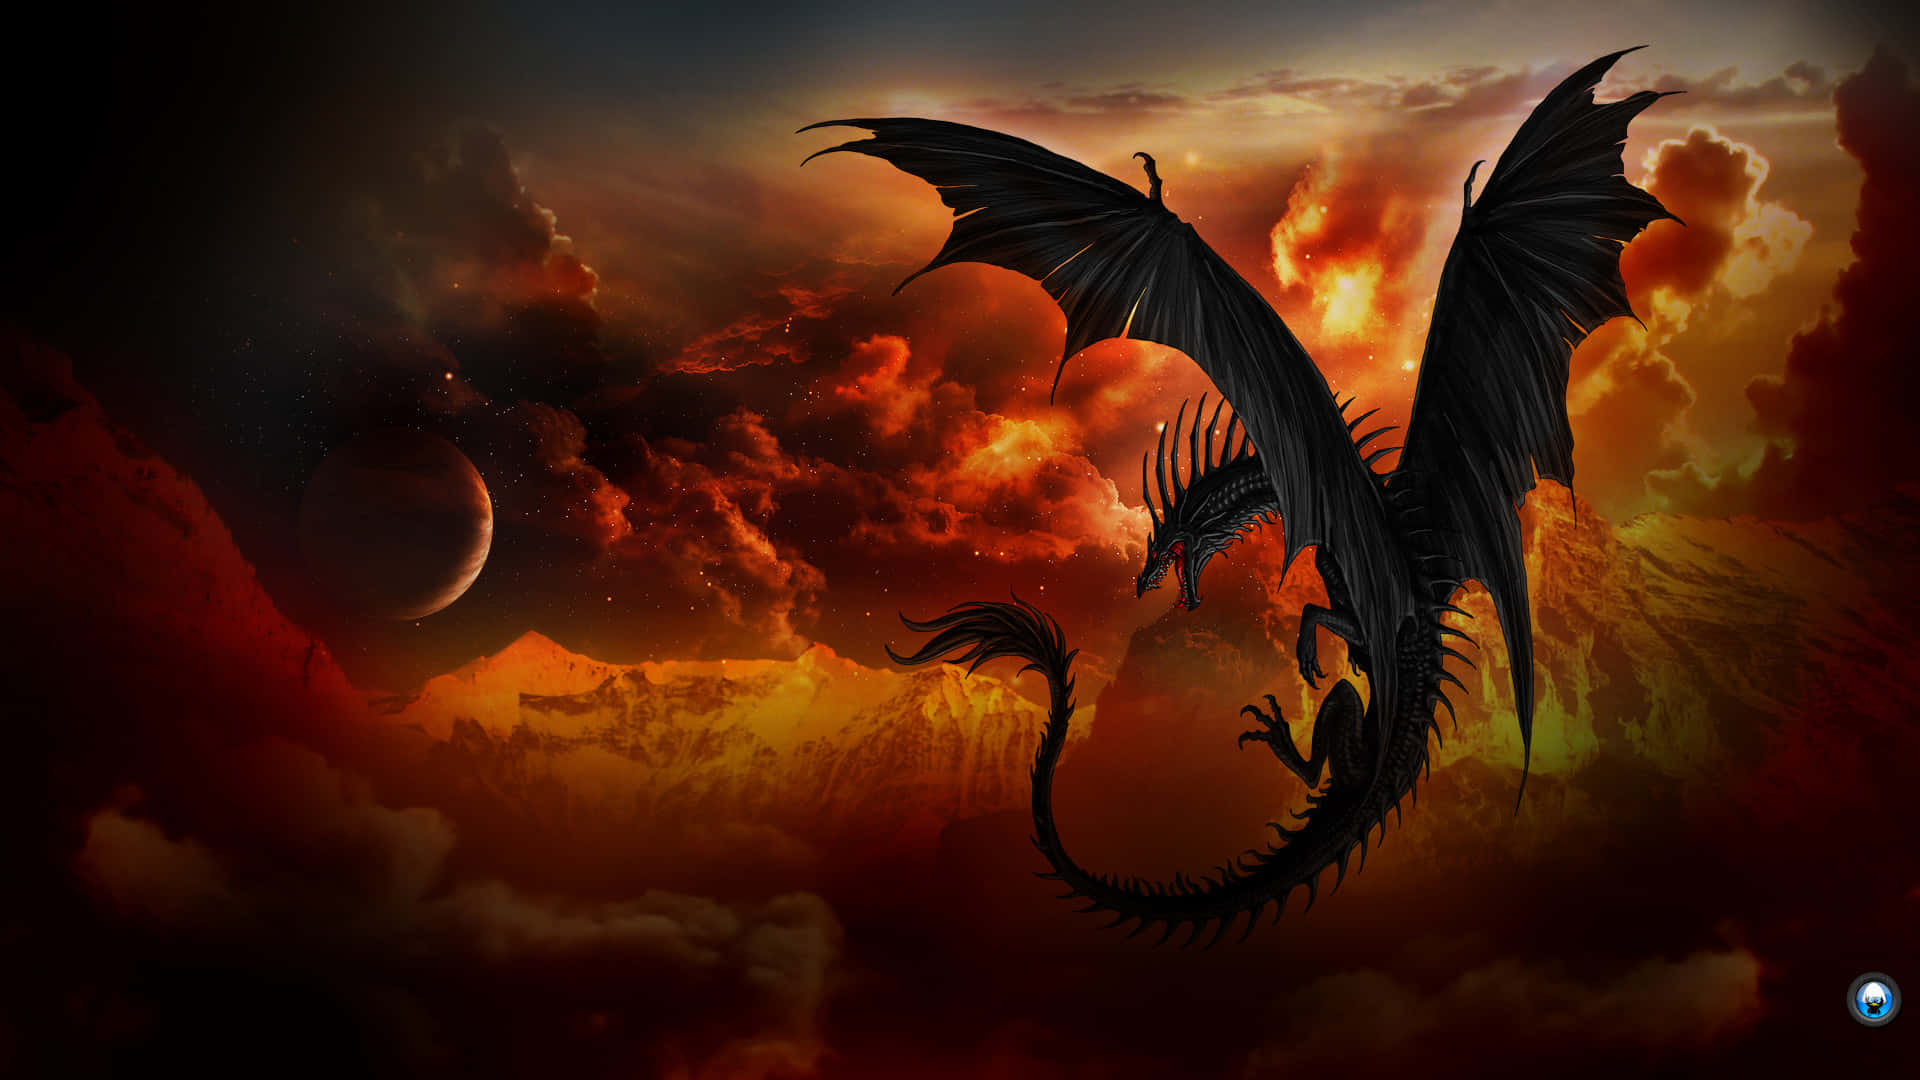 A Black Dragon Flying In The Sky With A Fire Background